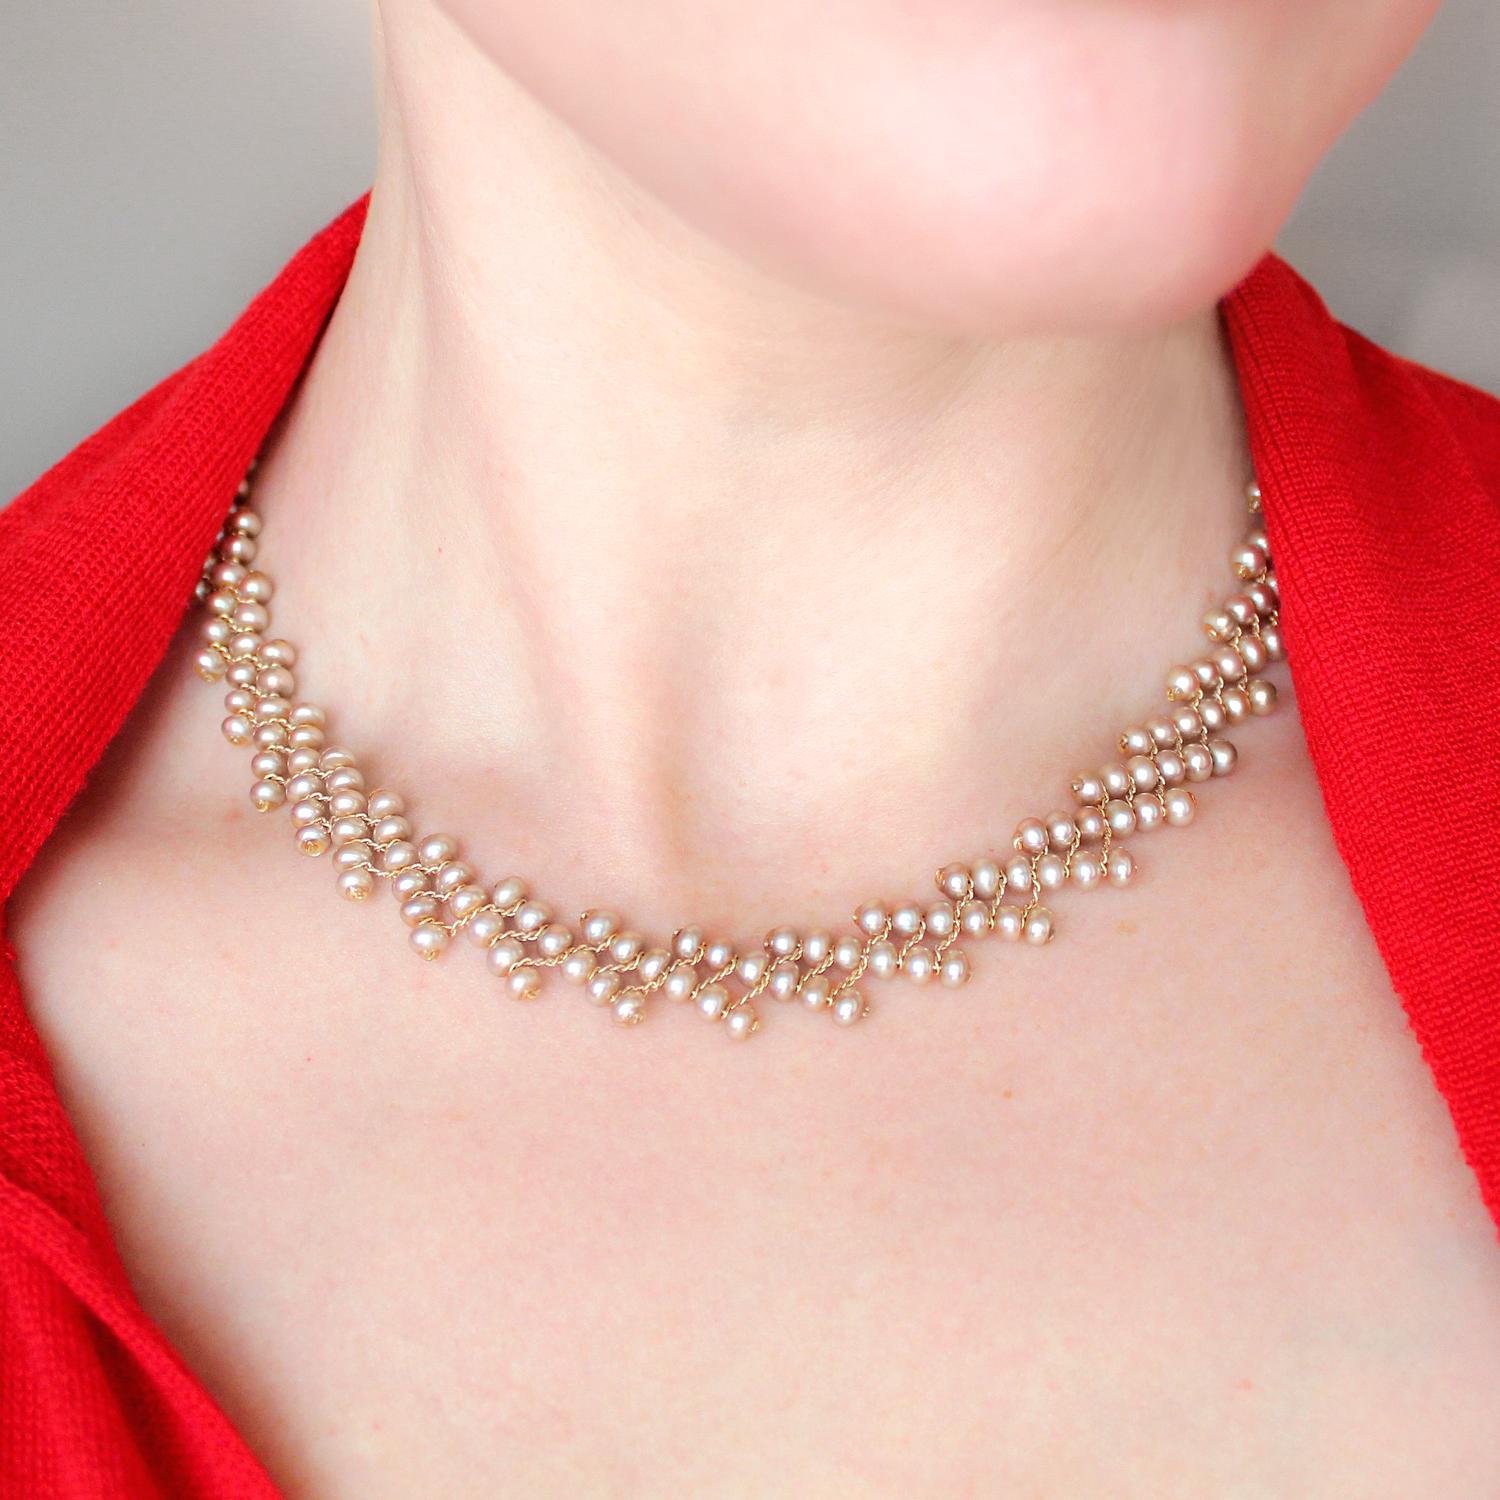 Champagne Pearl Ascending Ribbon Necklace handmade by jewelry artist Estyn Hulbert on a gold-filled chain with a 14k yellow gold clasp. 18 inches long.